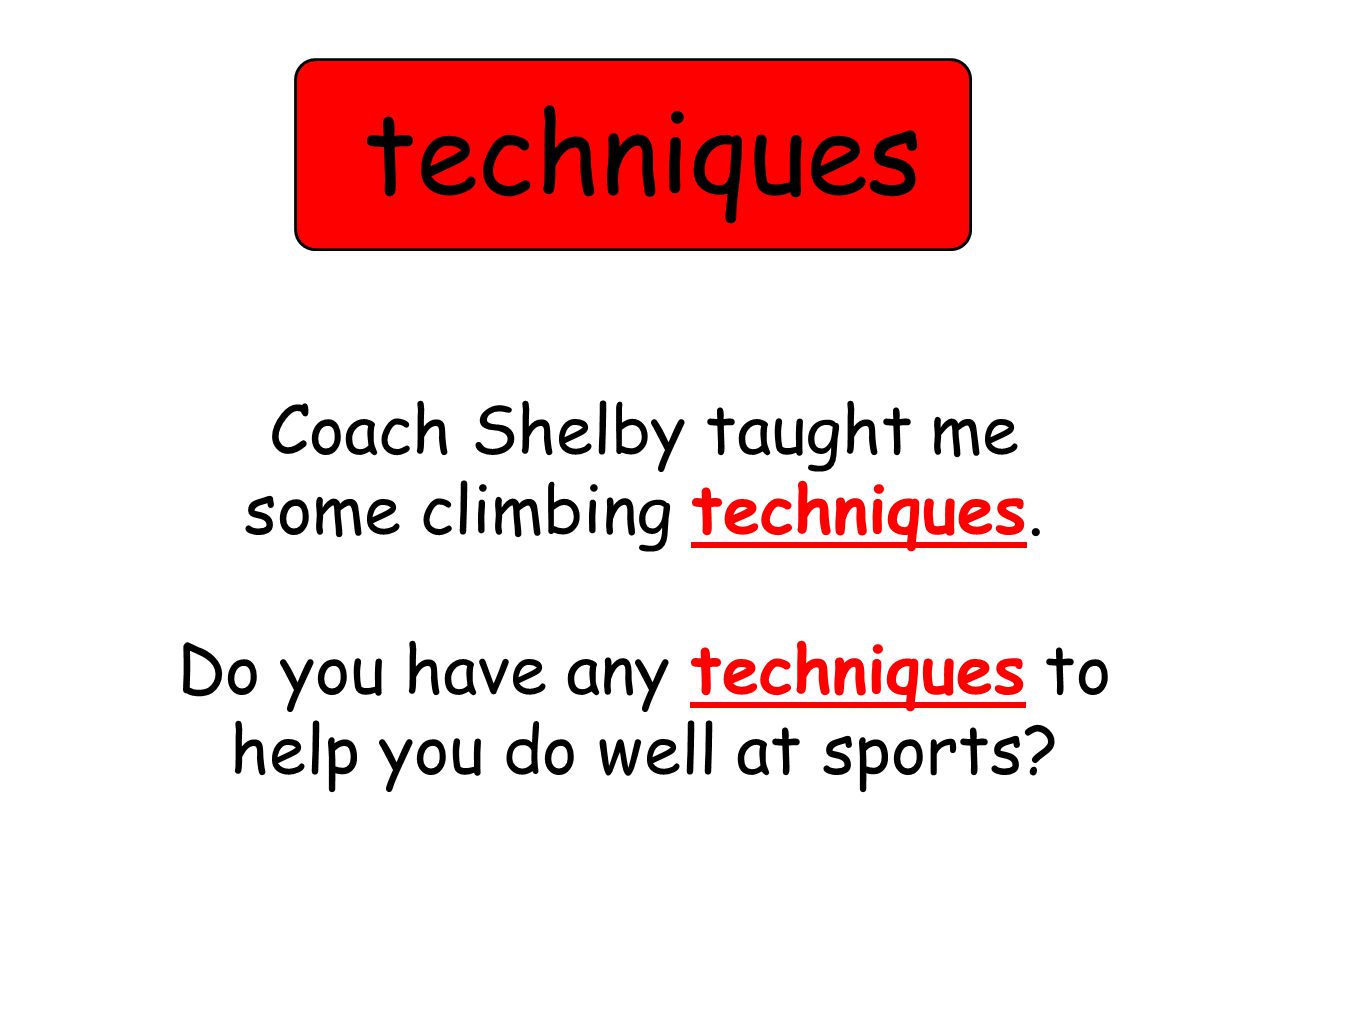 Coach Shelby taught me some climbing techniques.